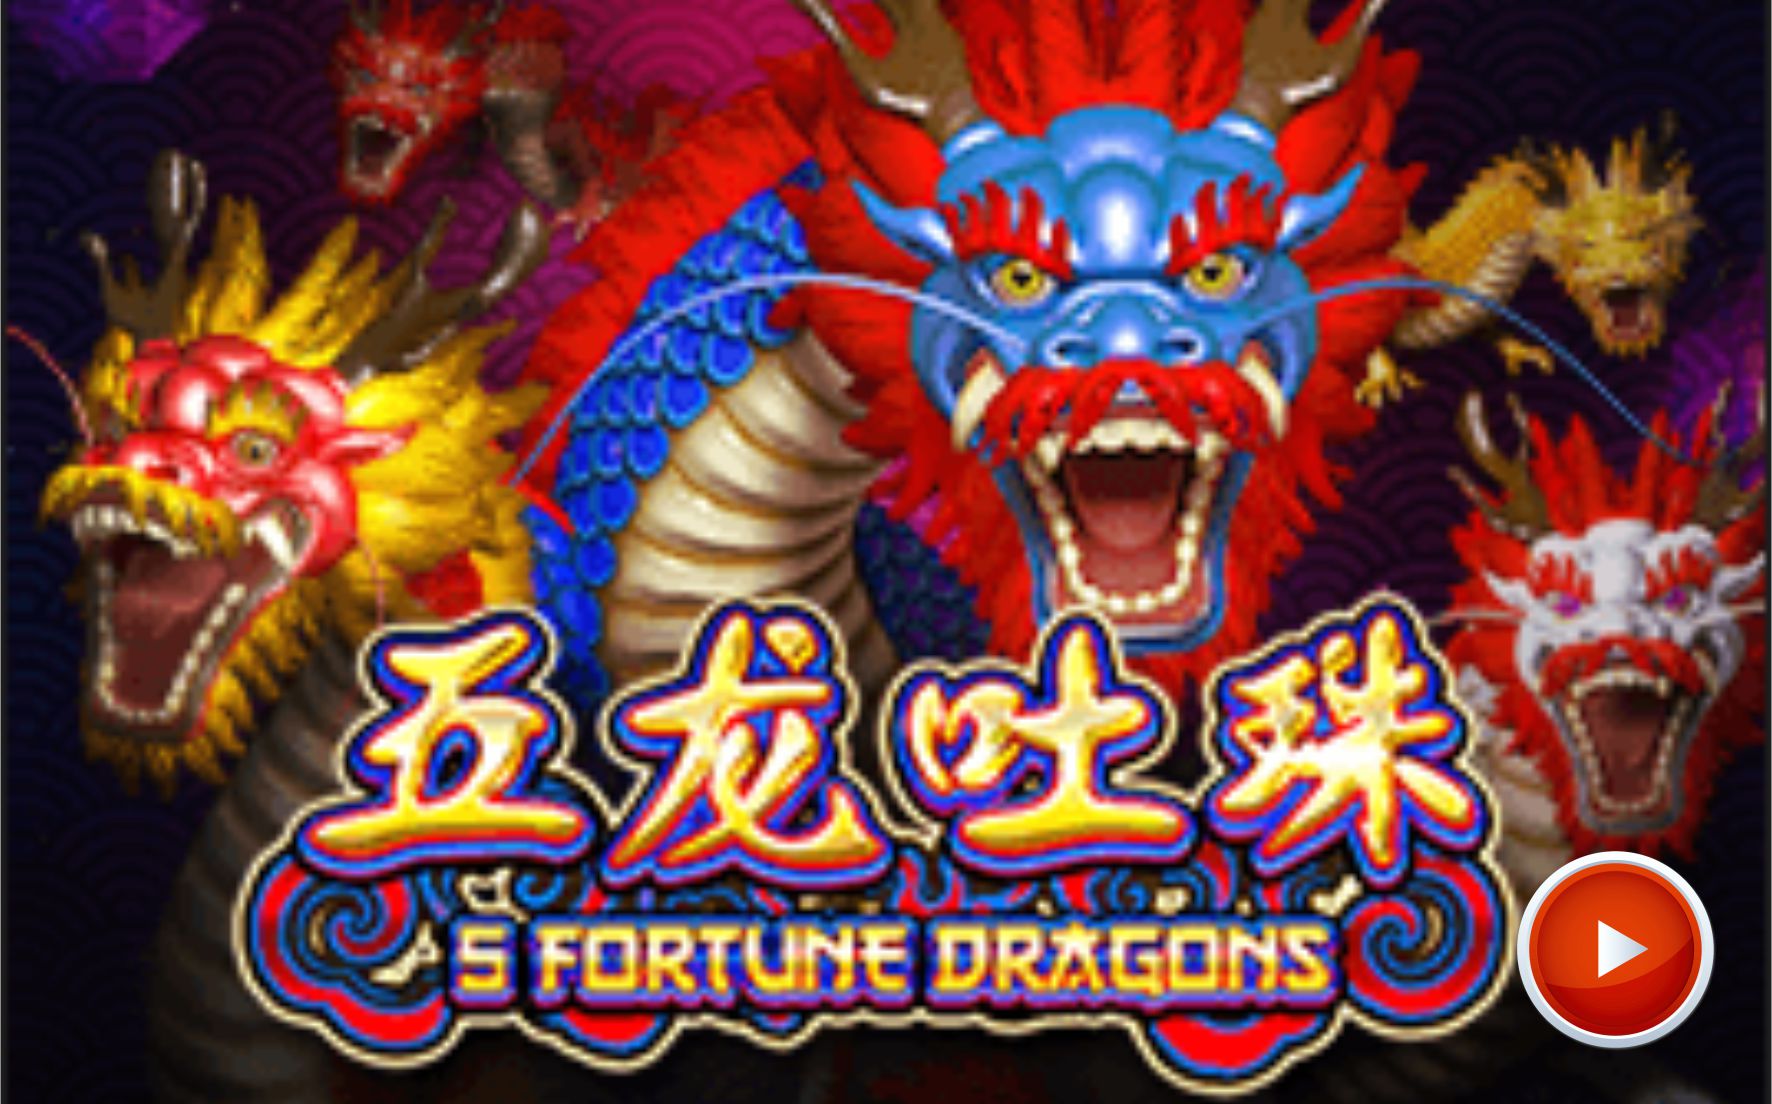 5 fortune dragons